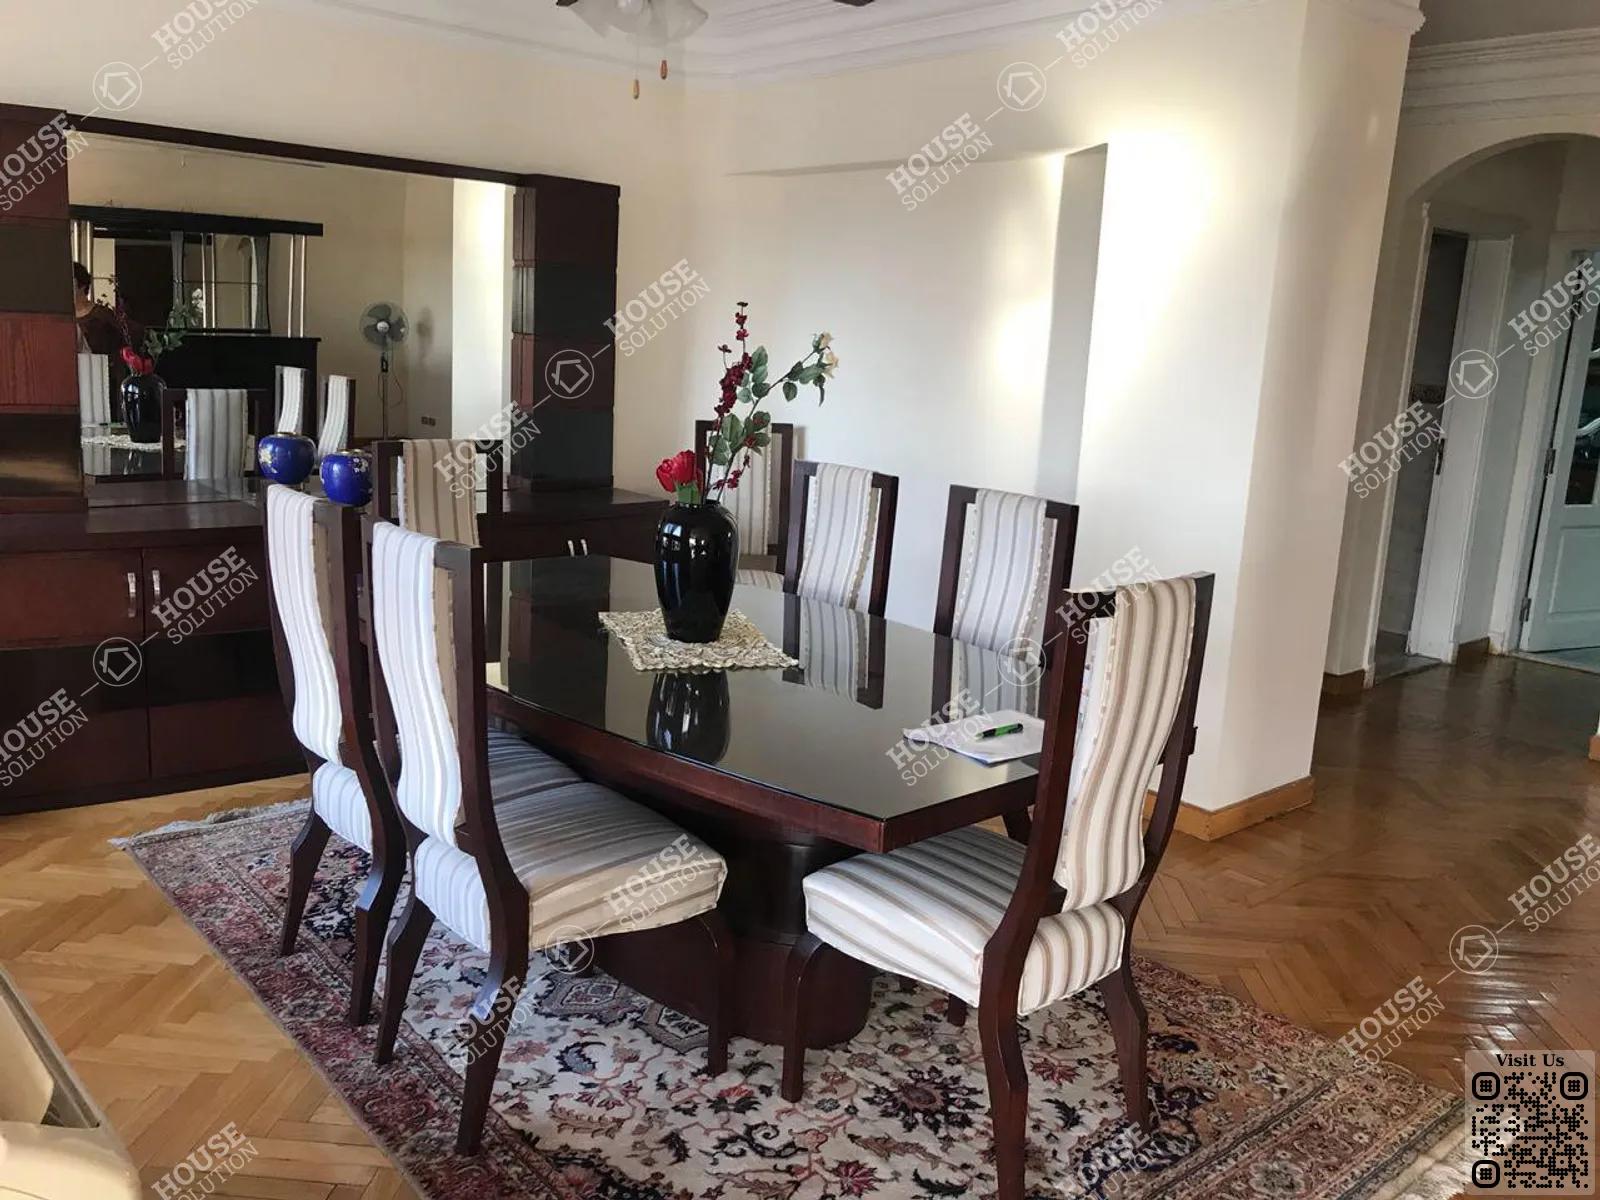 DINING AREA @ Apartments For Rent In Maadi Maadi Sarayat Area: 300 m² consists of 4 Bedrooms 4 Bathrooms Furnished 5 stars #3138-2